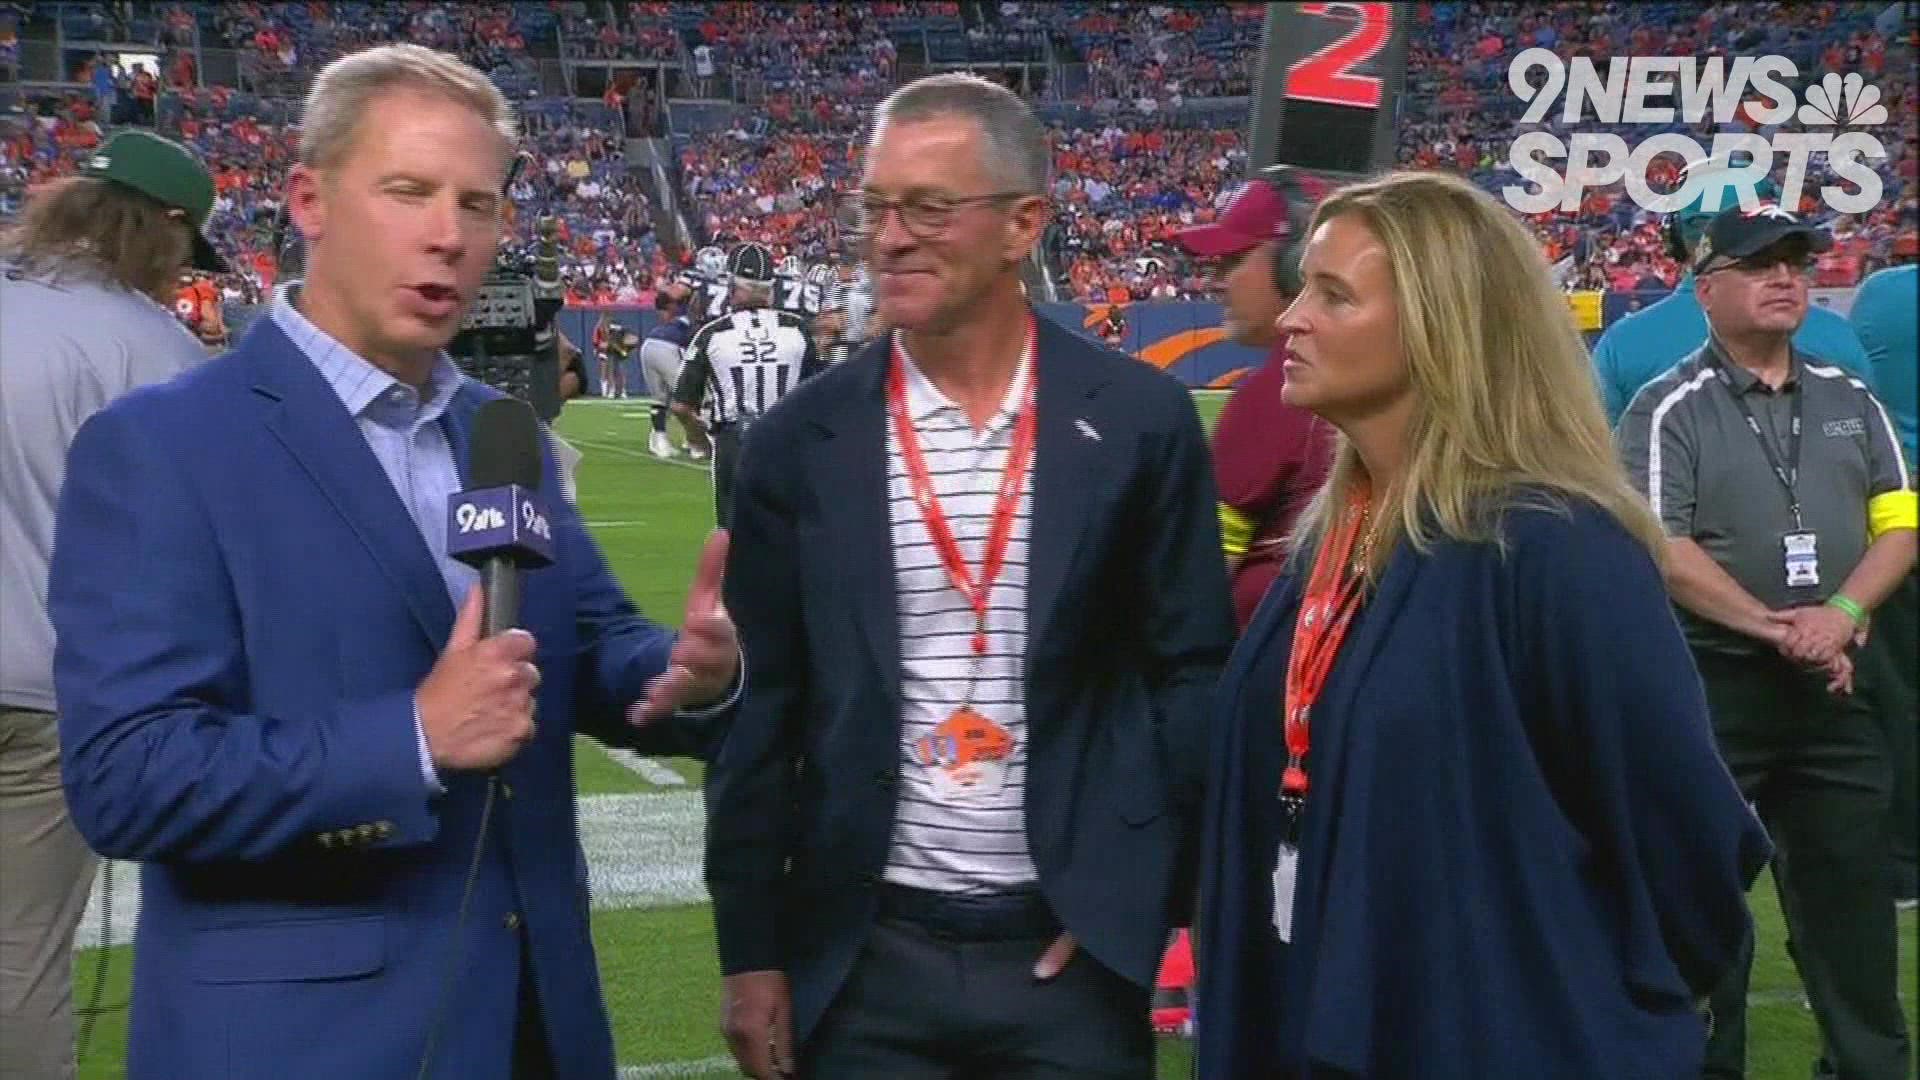 9NEWS Sports Director Rod Mackey interviews Denver Broncos ownership partners Greg Penner and Carrie Walton-Penner during the preseason opener.